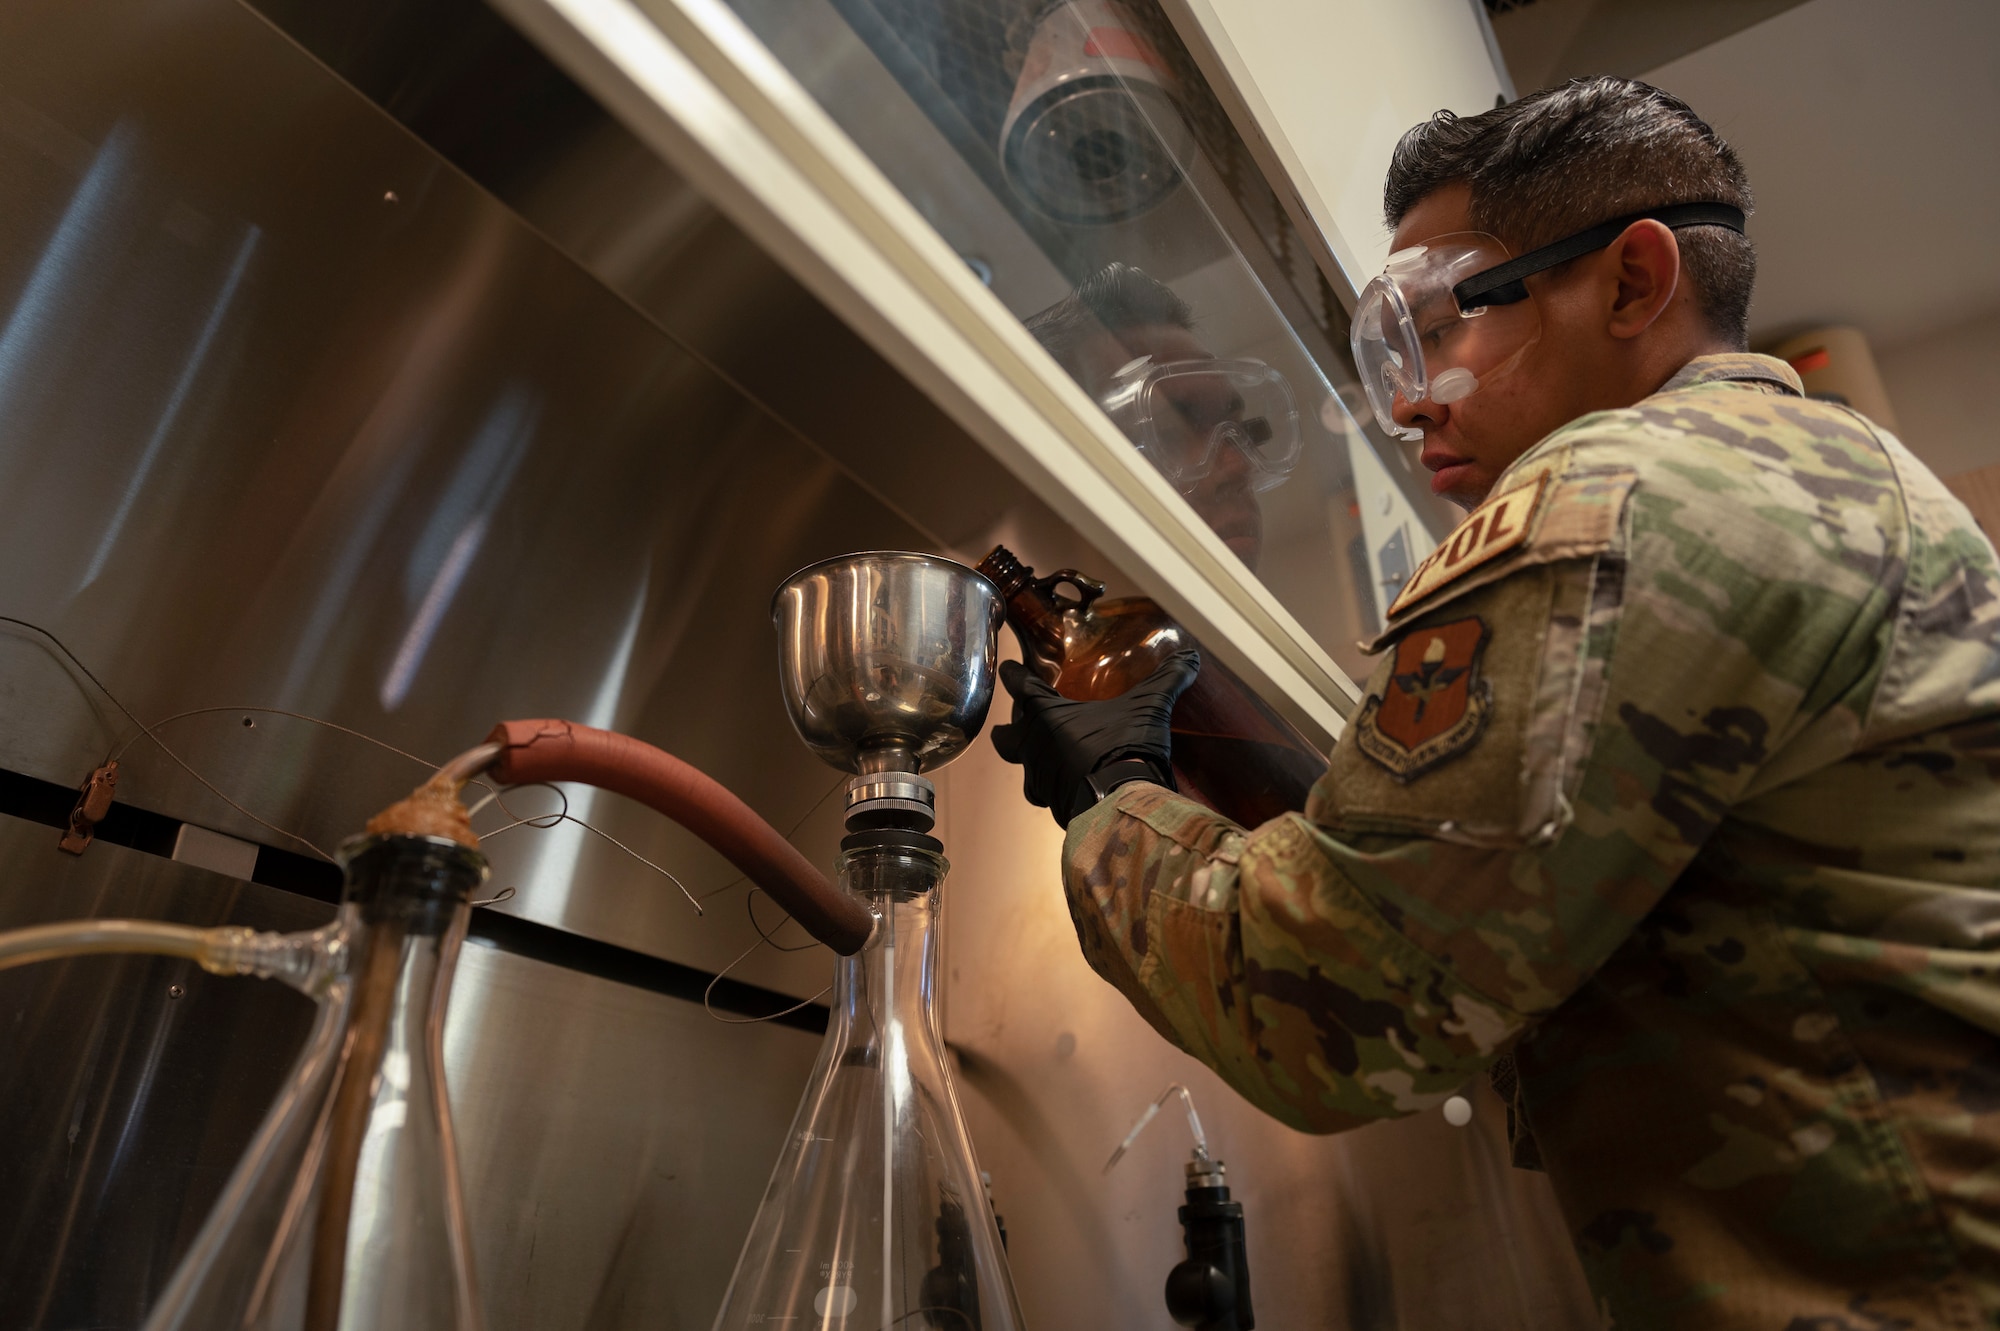 U.S. Air Force Staff Sgt. Austin Taitingfong, 49th Logistic Readiness Squadron fuels laboratory noncommissioned officer in charge, filters a fuel sample at Holloman Air Force Base, New Mexico, Dec. 12, 2022. The 49th LRS fuel flight’s priority is to ensure that clean, dry, serviceable fuel products are provided to further the 49th Wing’s mission in the air and on the ground. (U.S. Air Force photo by Airman 1st Class Isaiah Pedrazzini)